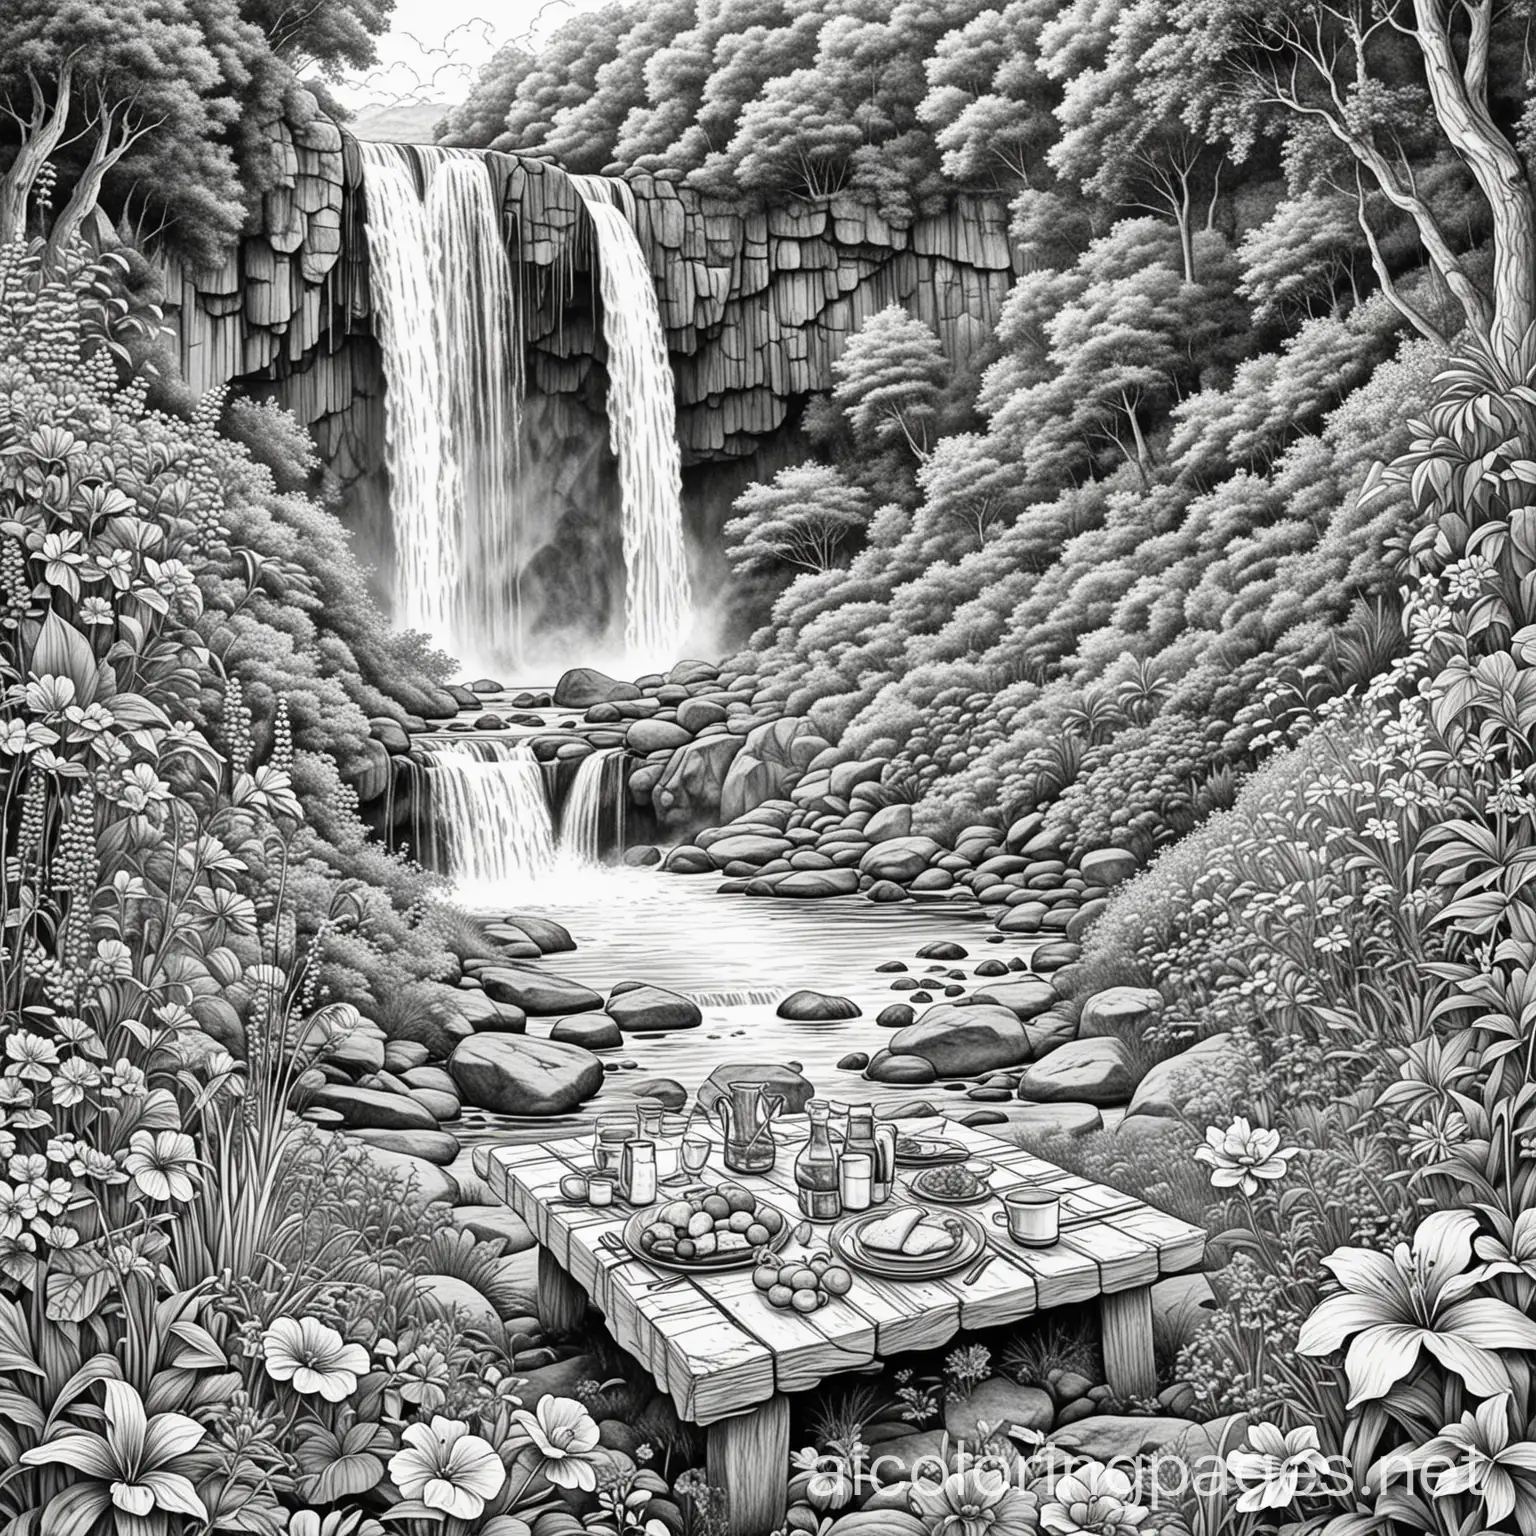 an exotic looking picnic  next to a waterfall in a valley full of flowers
, Coloring Page, black and white, line art, white background, Simplicity, Ample White Space. The background of the coloring page is plain white to make it easy for young children to color within the lines. The outlines of all the subjects are easy to distinguish, making it simple for kids to color without too much difficulty